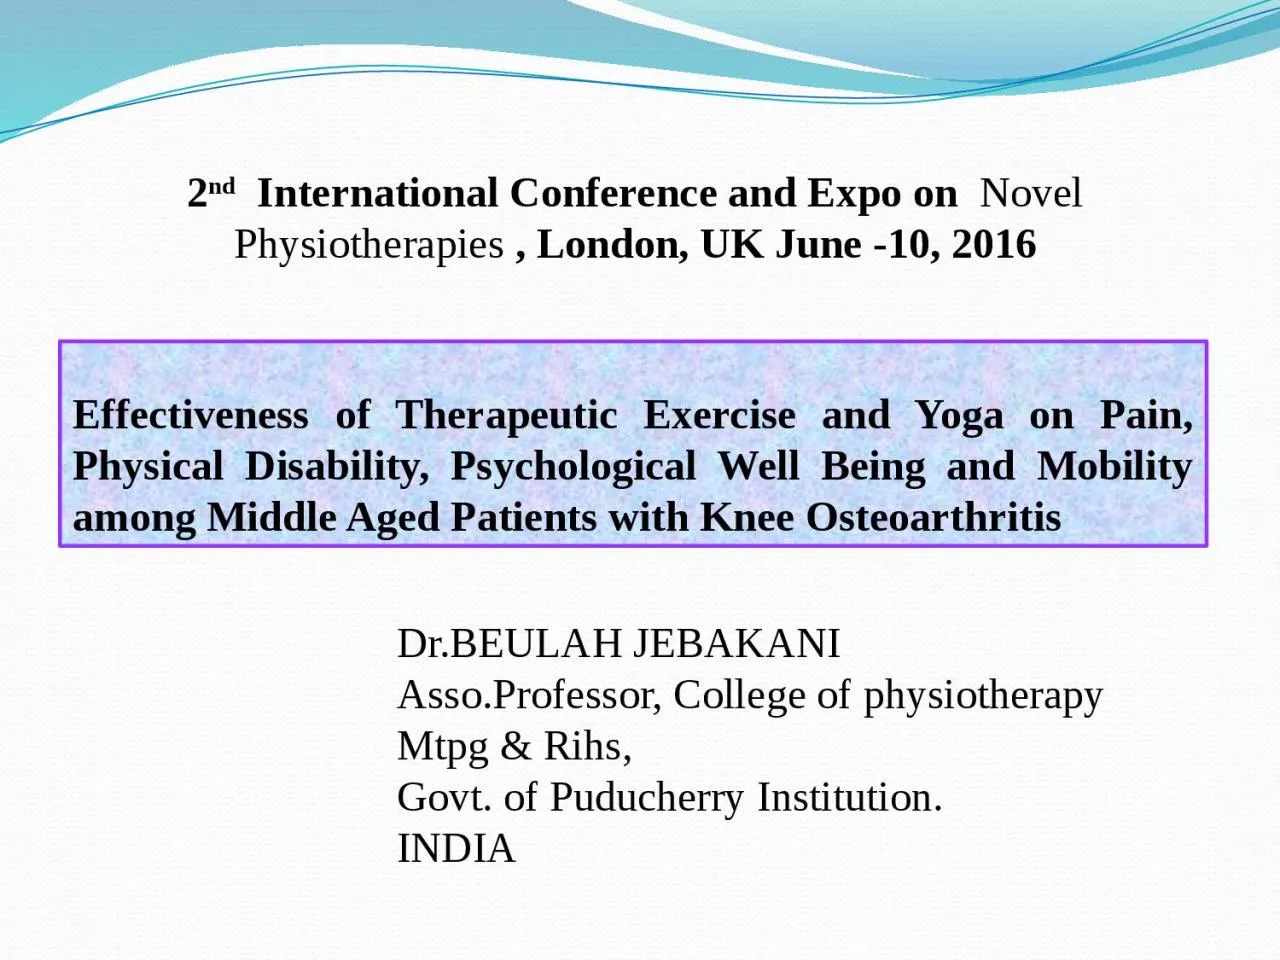 Effectiveness of Therapeutic Exercise and Yoga on Pain, Physical Disability, Psychological